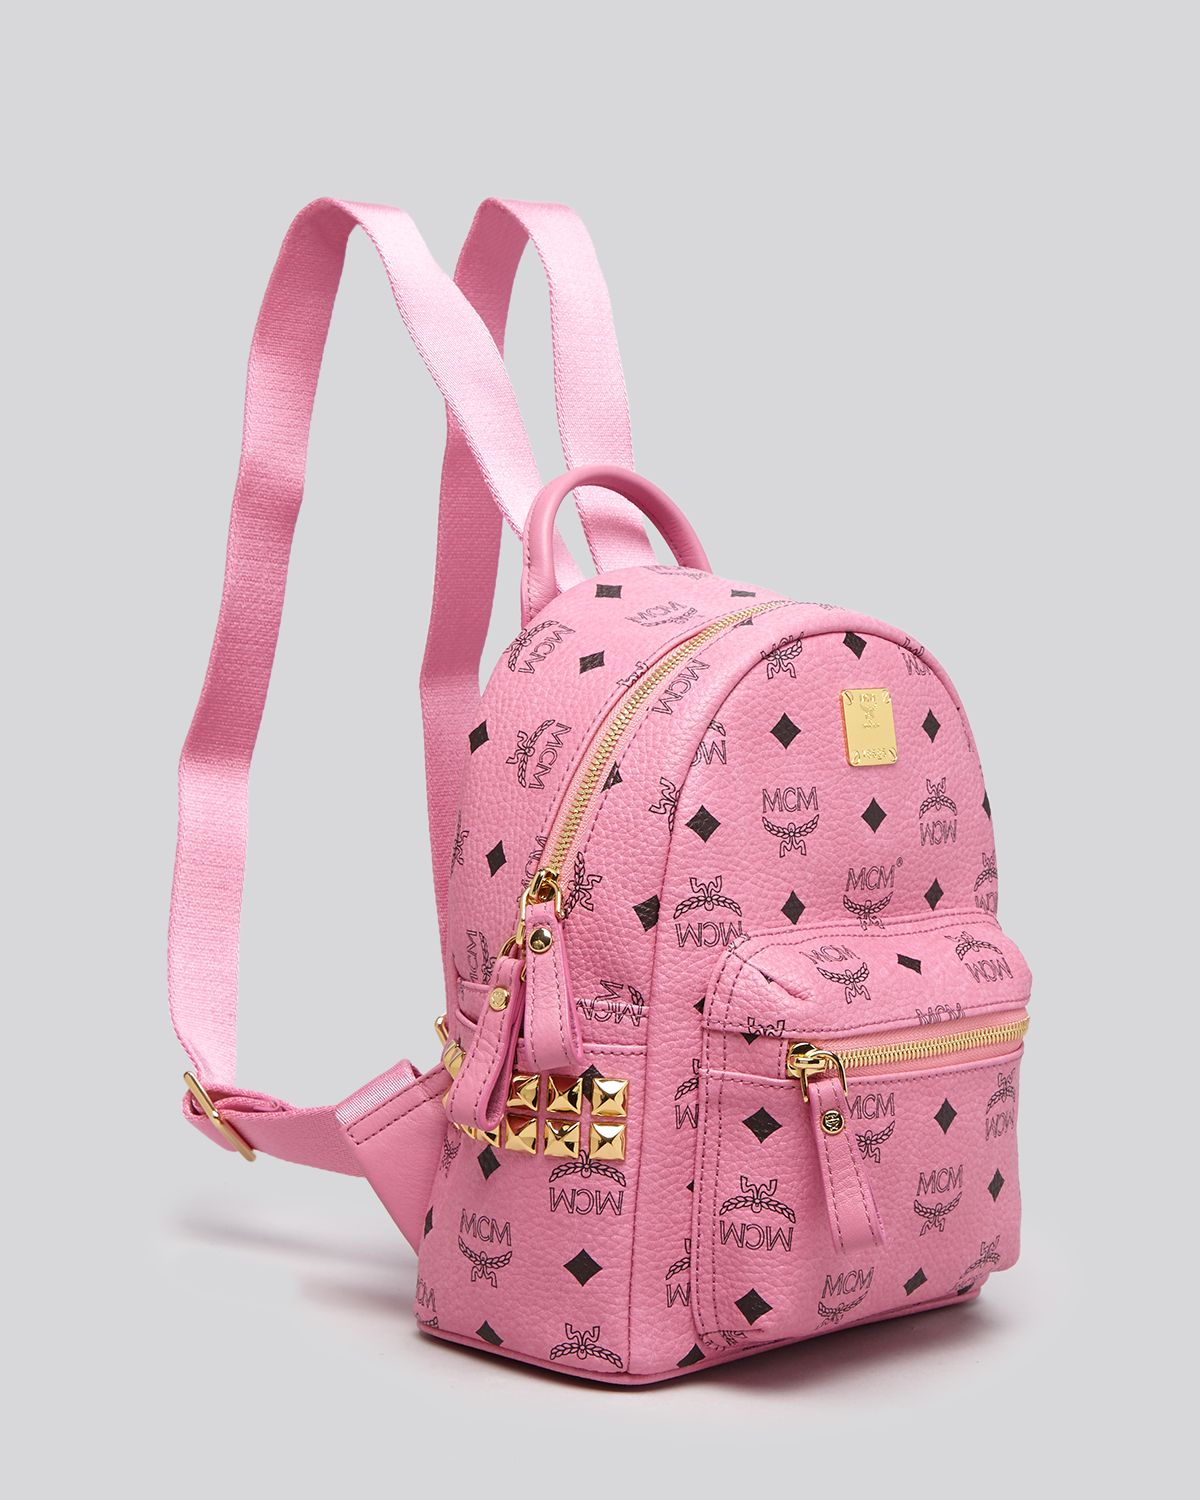 Mcm Backpack - Side Stud Mini in Pink (Pink/Gold) | Lyst